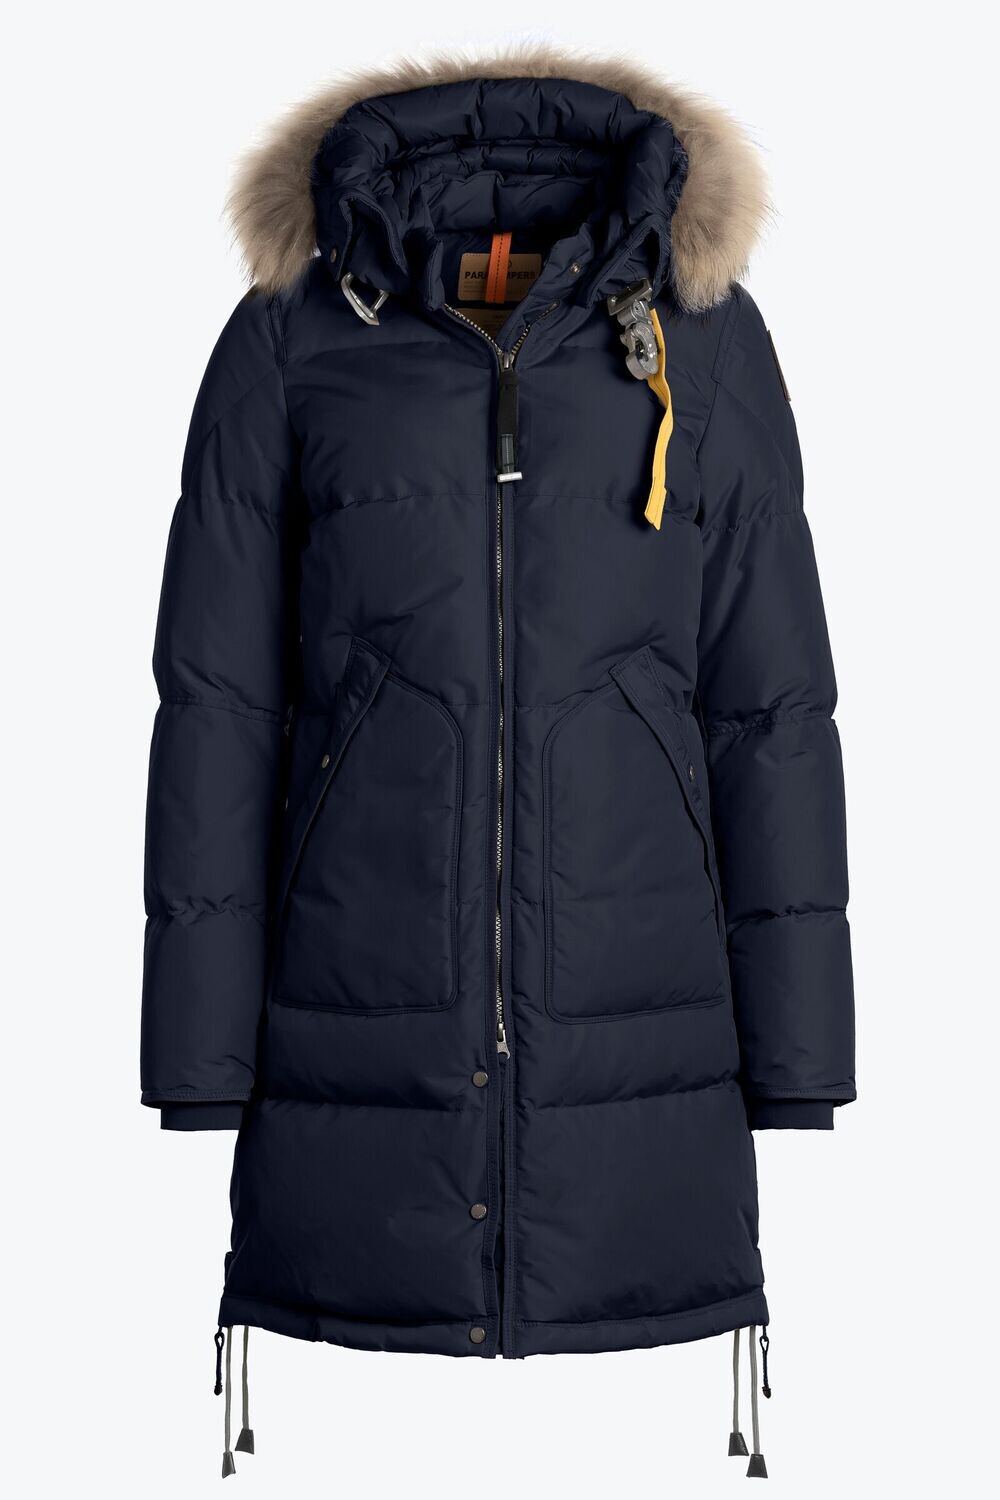 PARAJUMPERS | LONGBEAR | NAVY